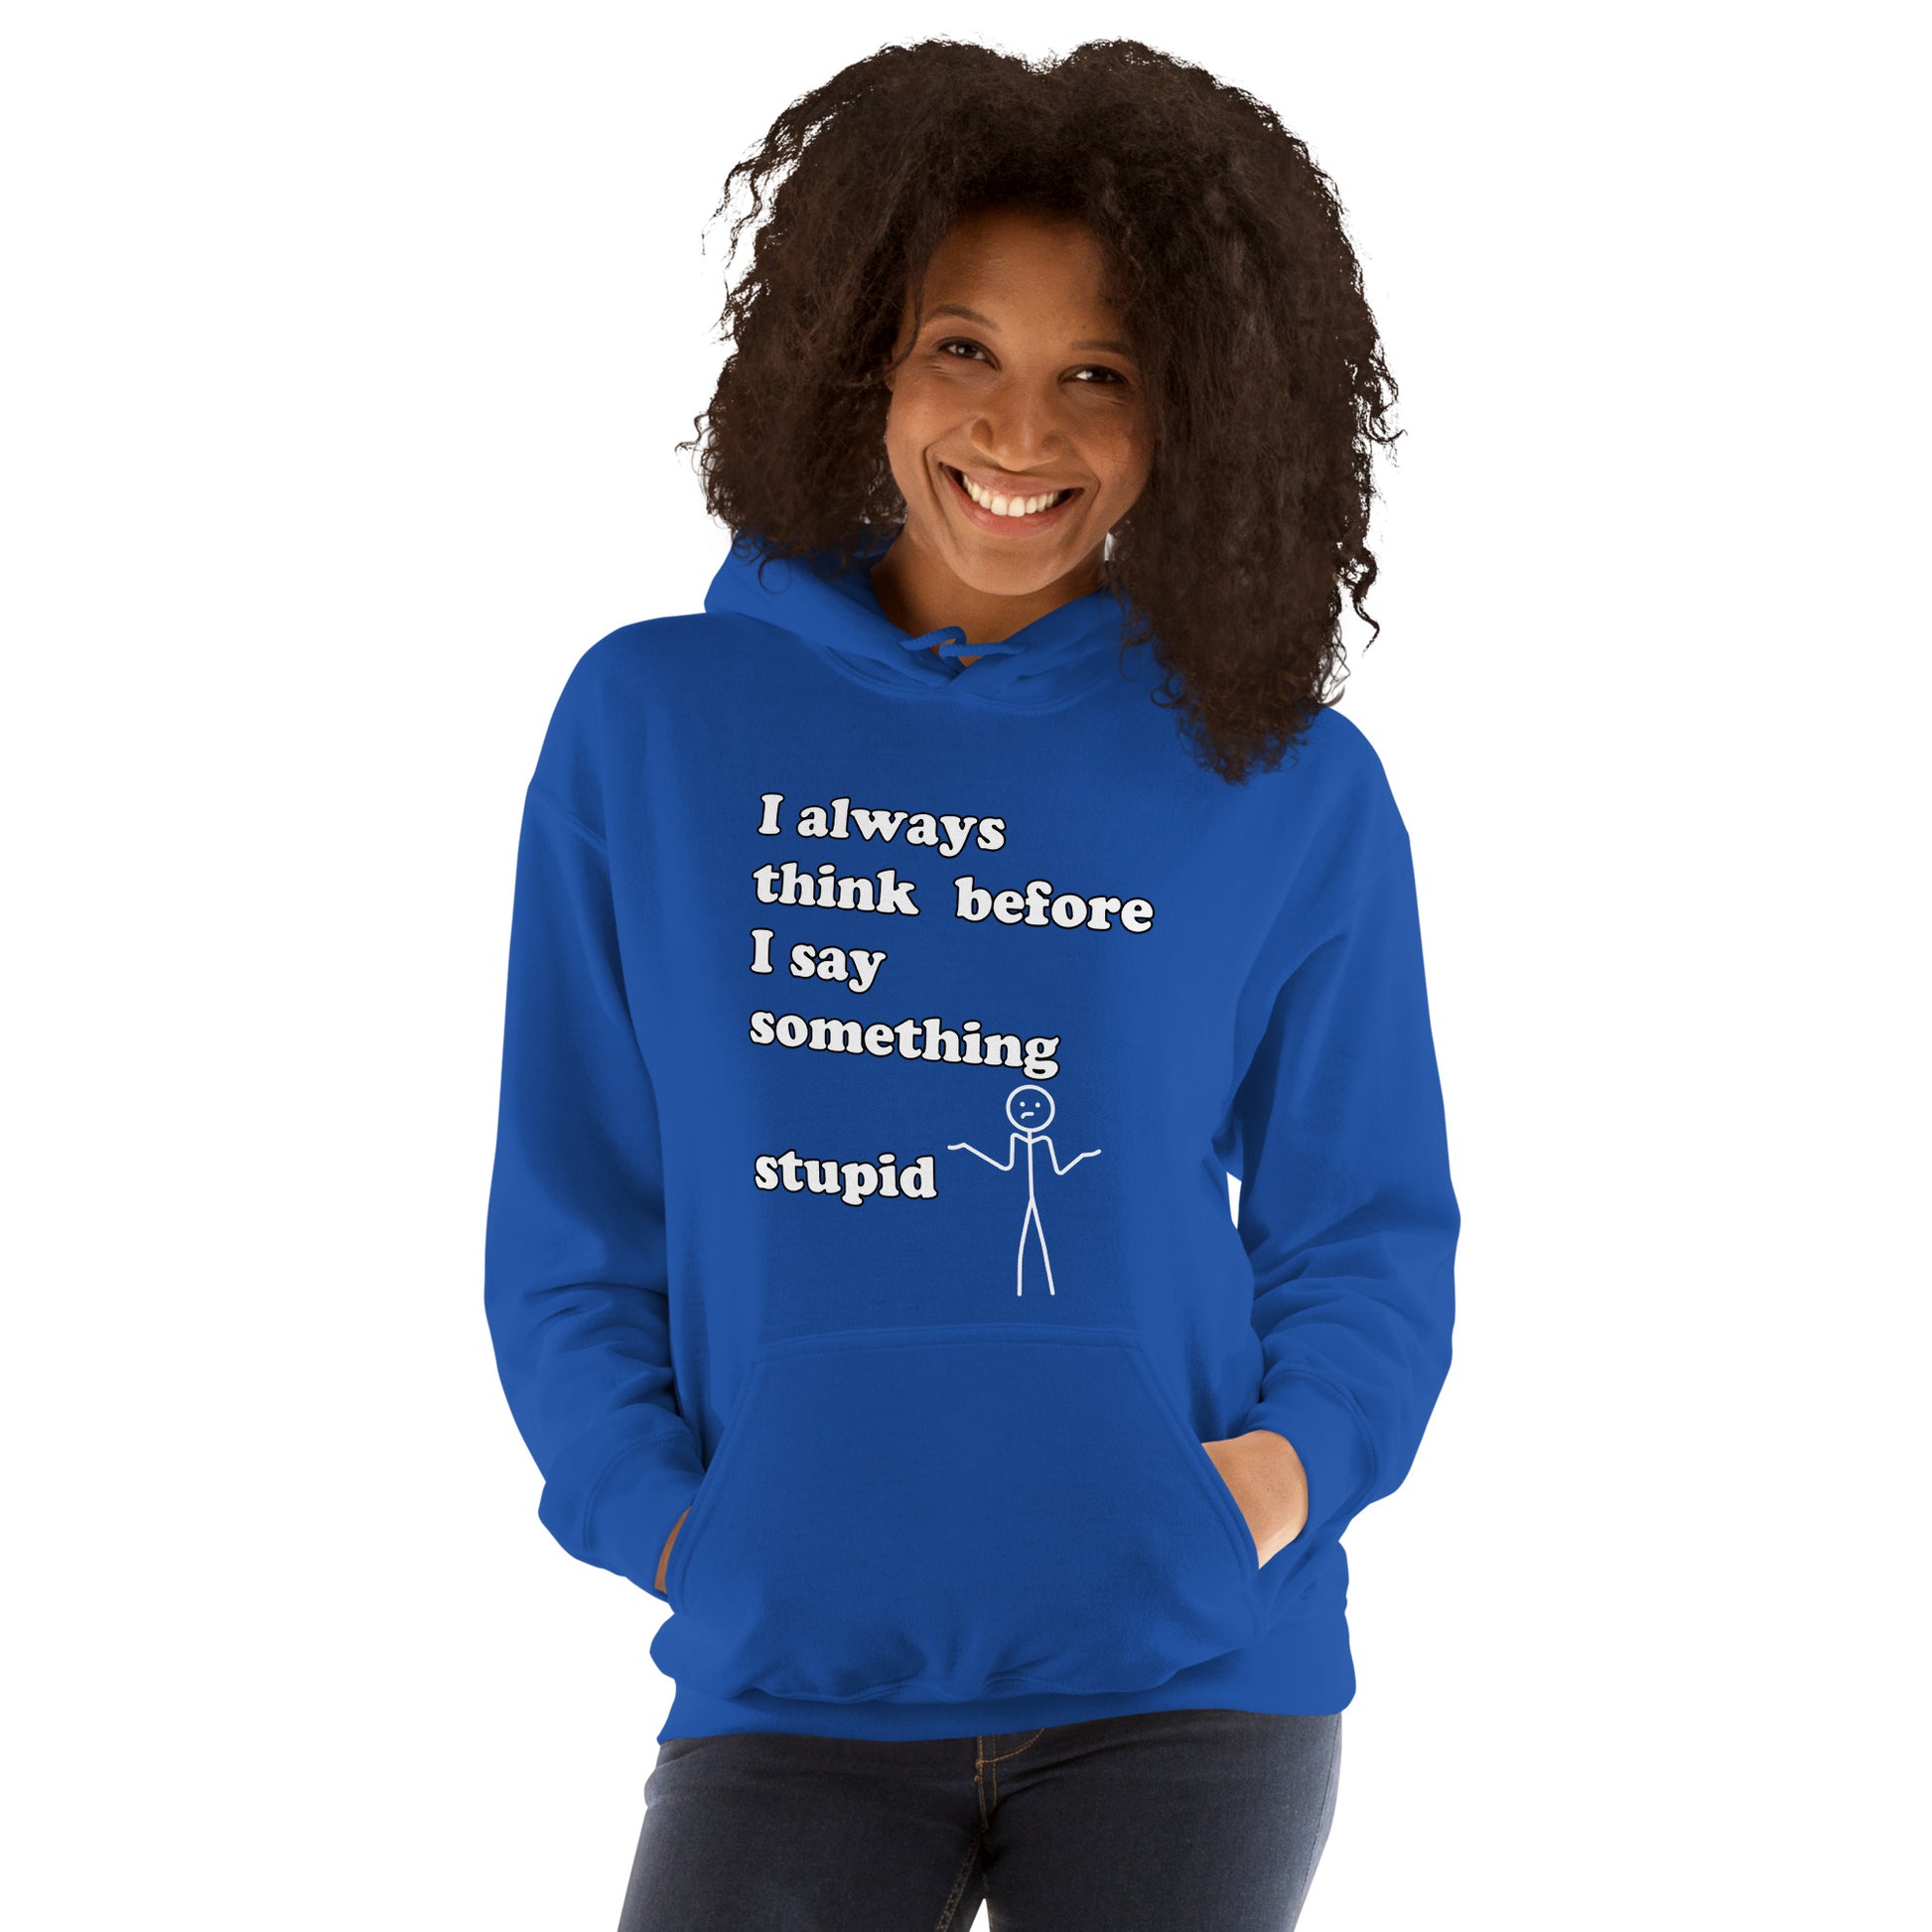 Woman with royal blue hoodie with text "I always think before I say something stupid"